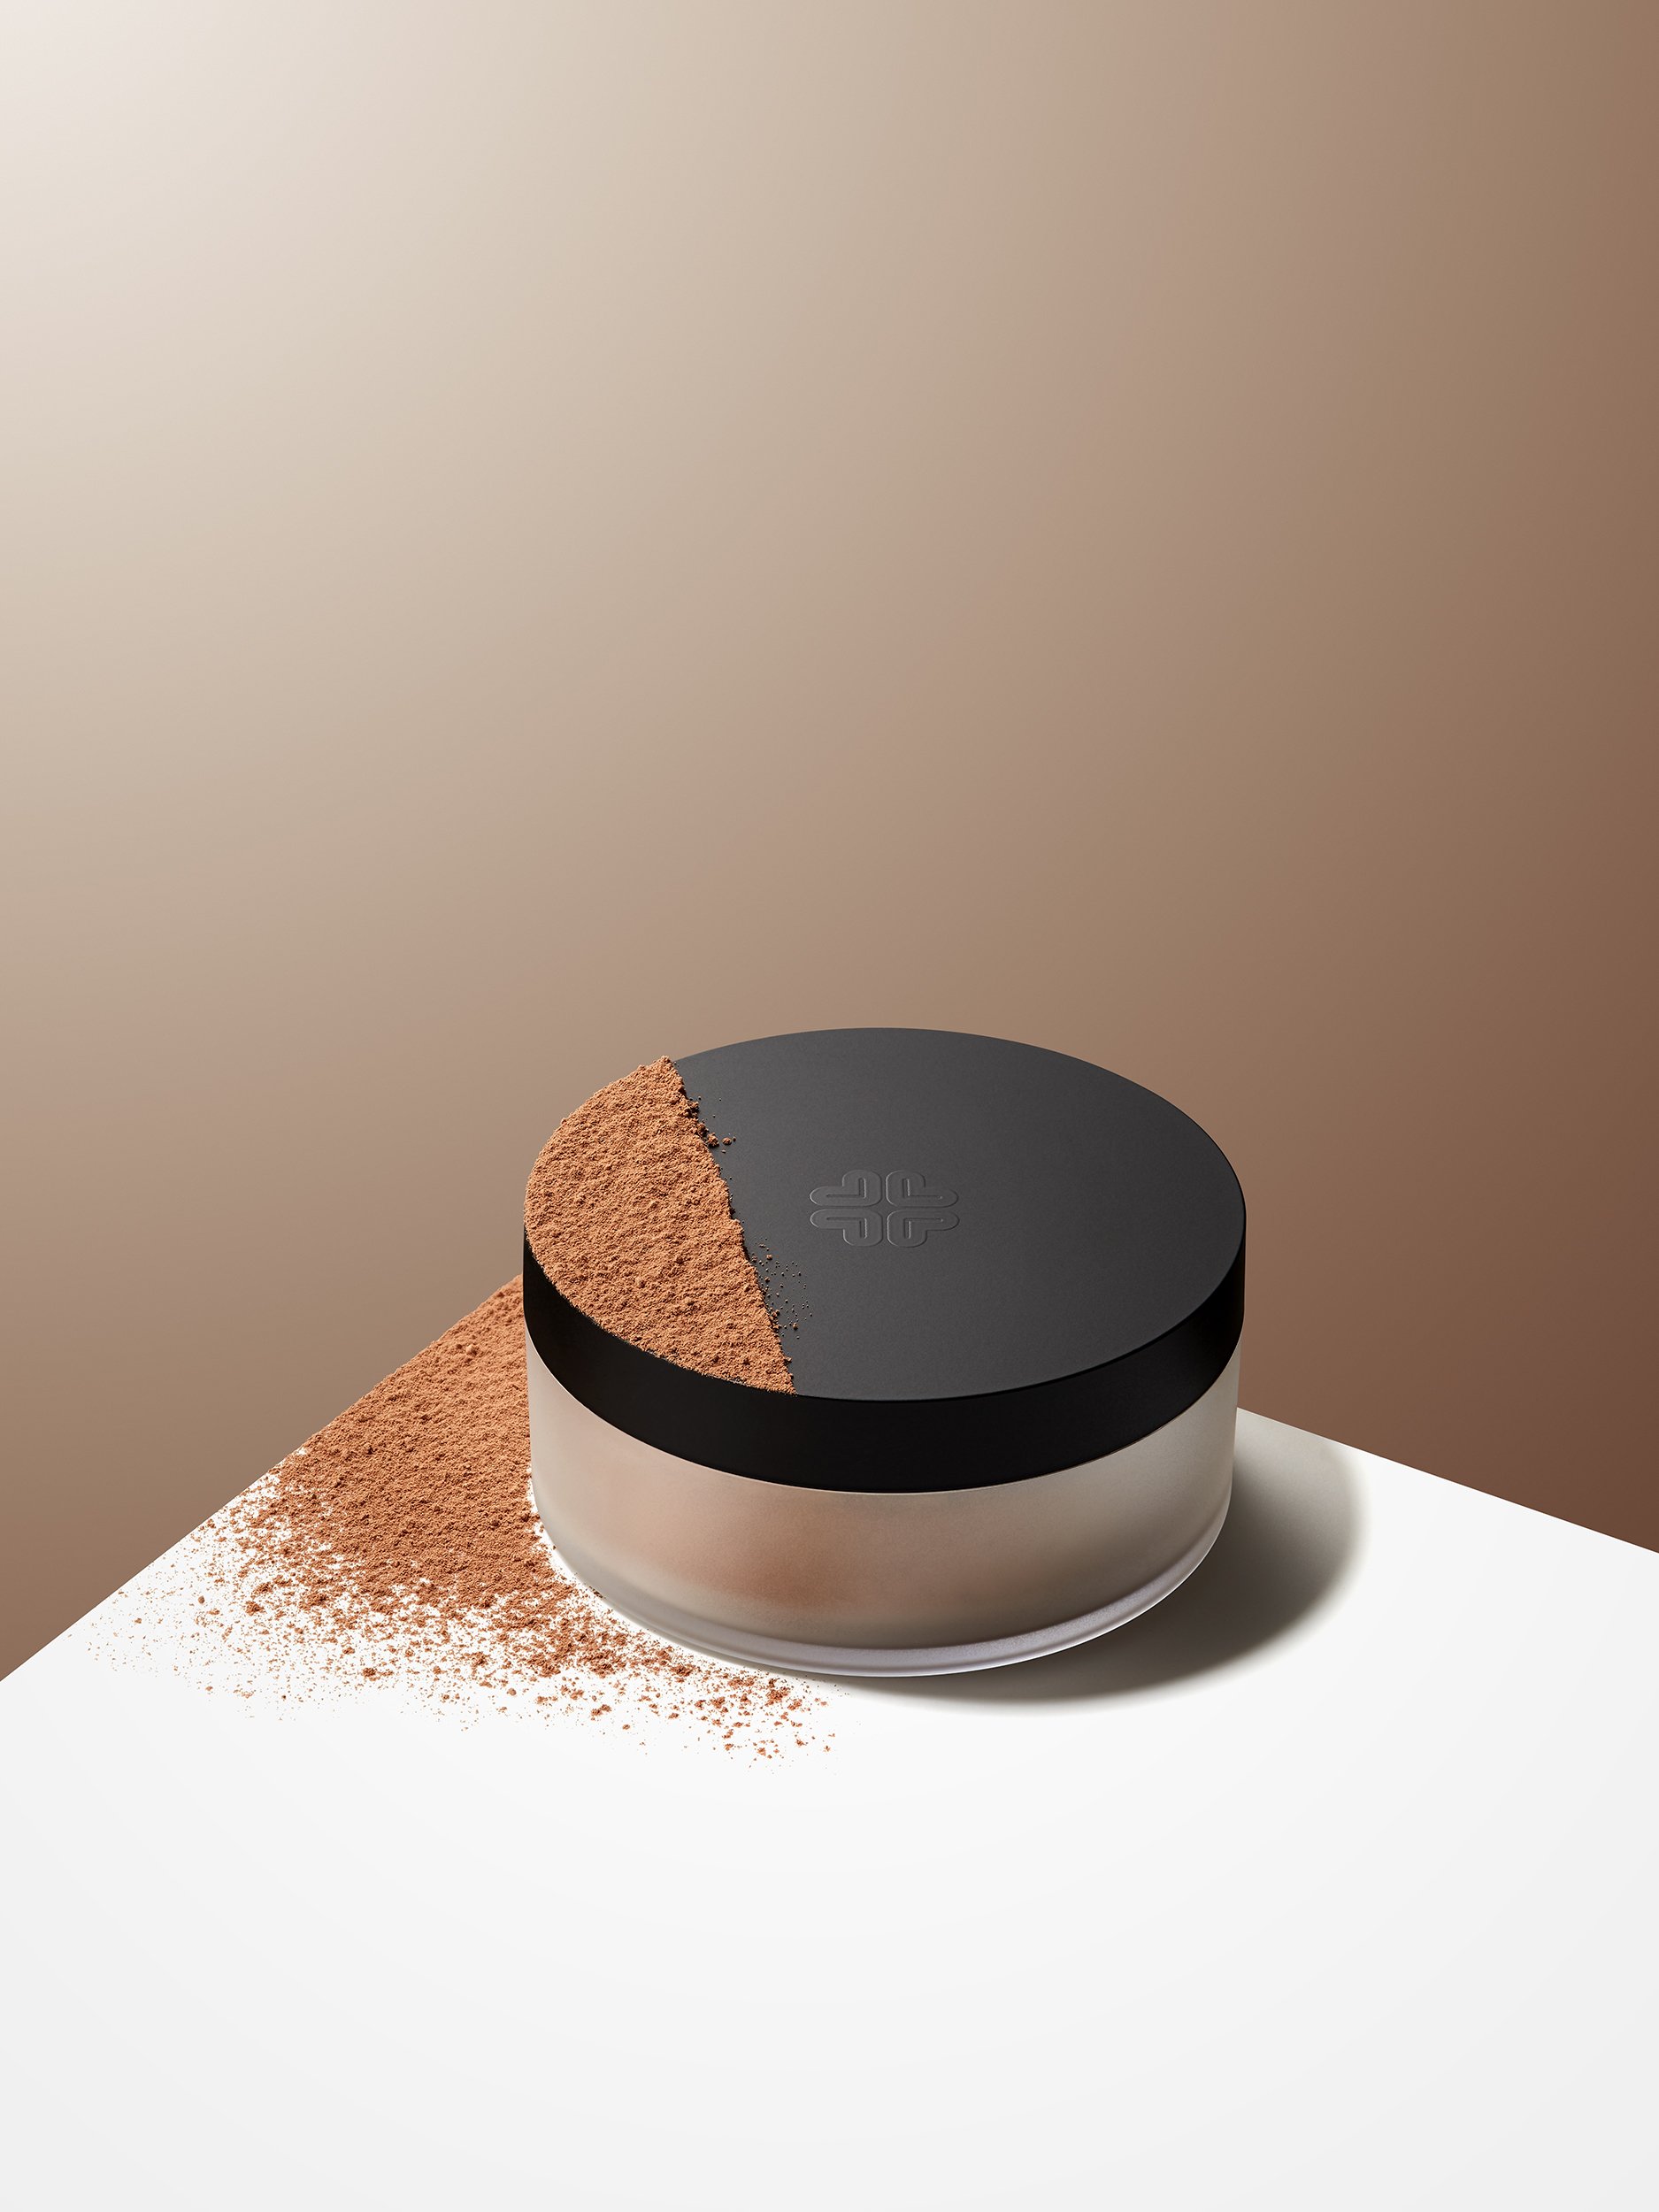 Lily Lolo Mineral Bronzer by London-based product photographer Simon Lyle Ritchie